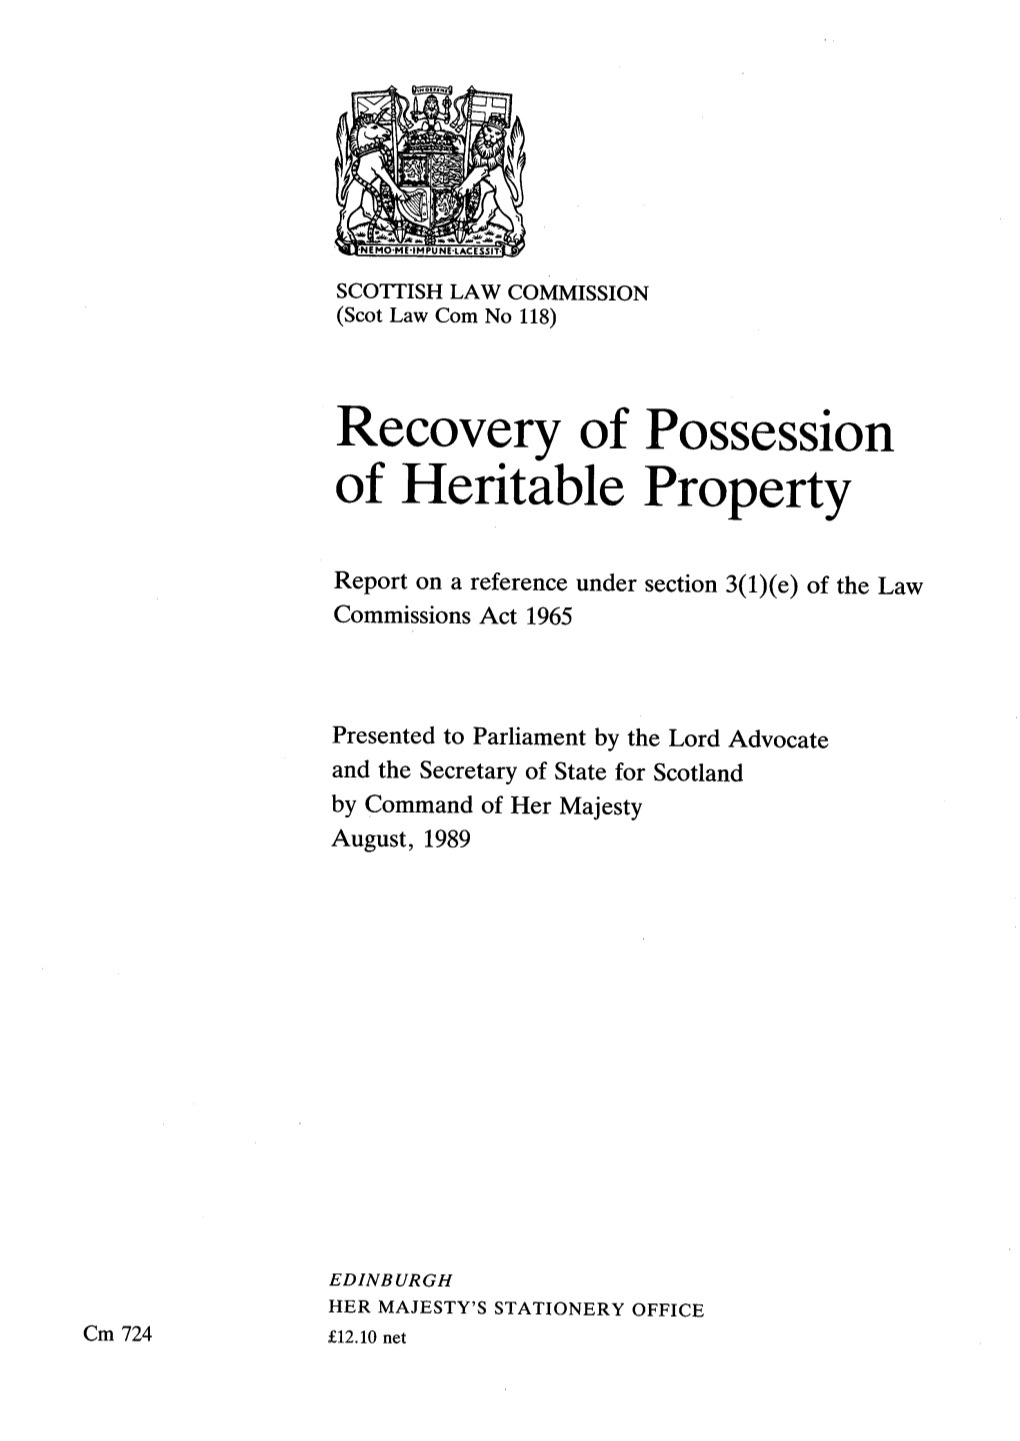 Report on Recovery of Possession of Heritable Property